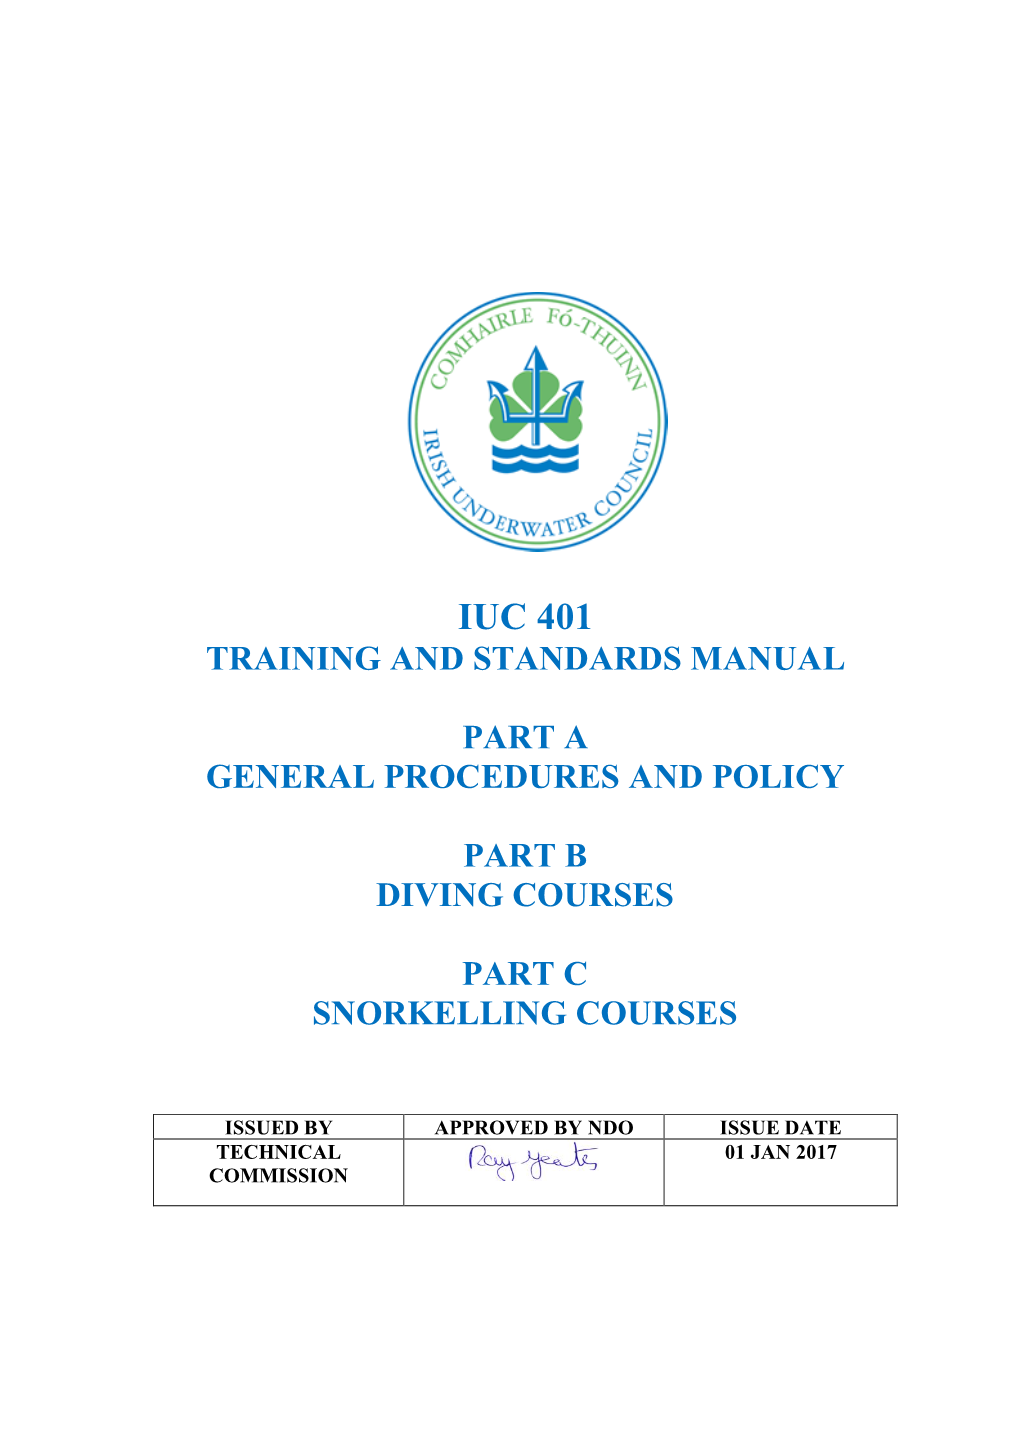 Iuc 401 Training and Standards Manual